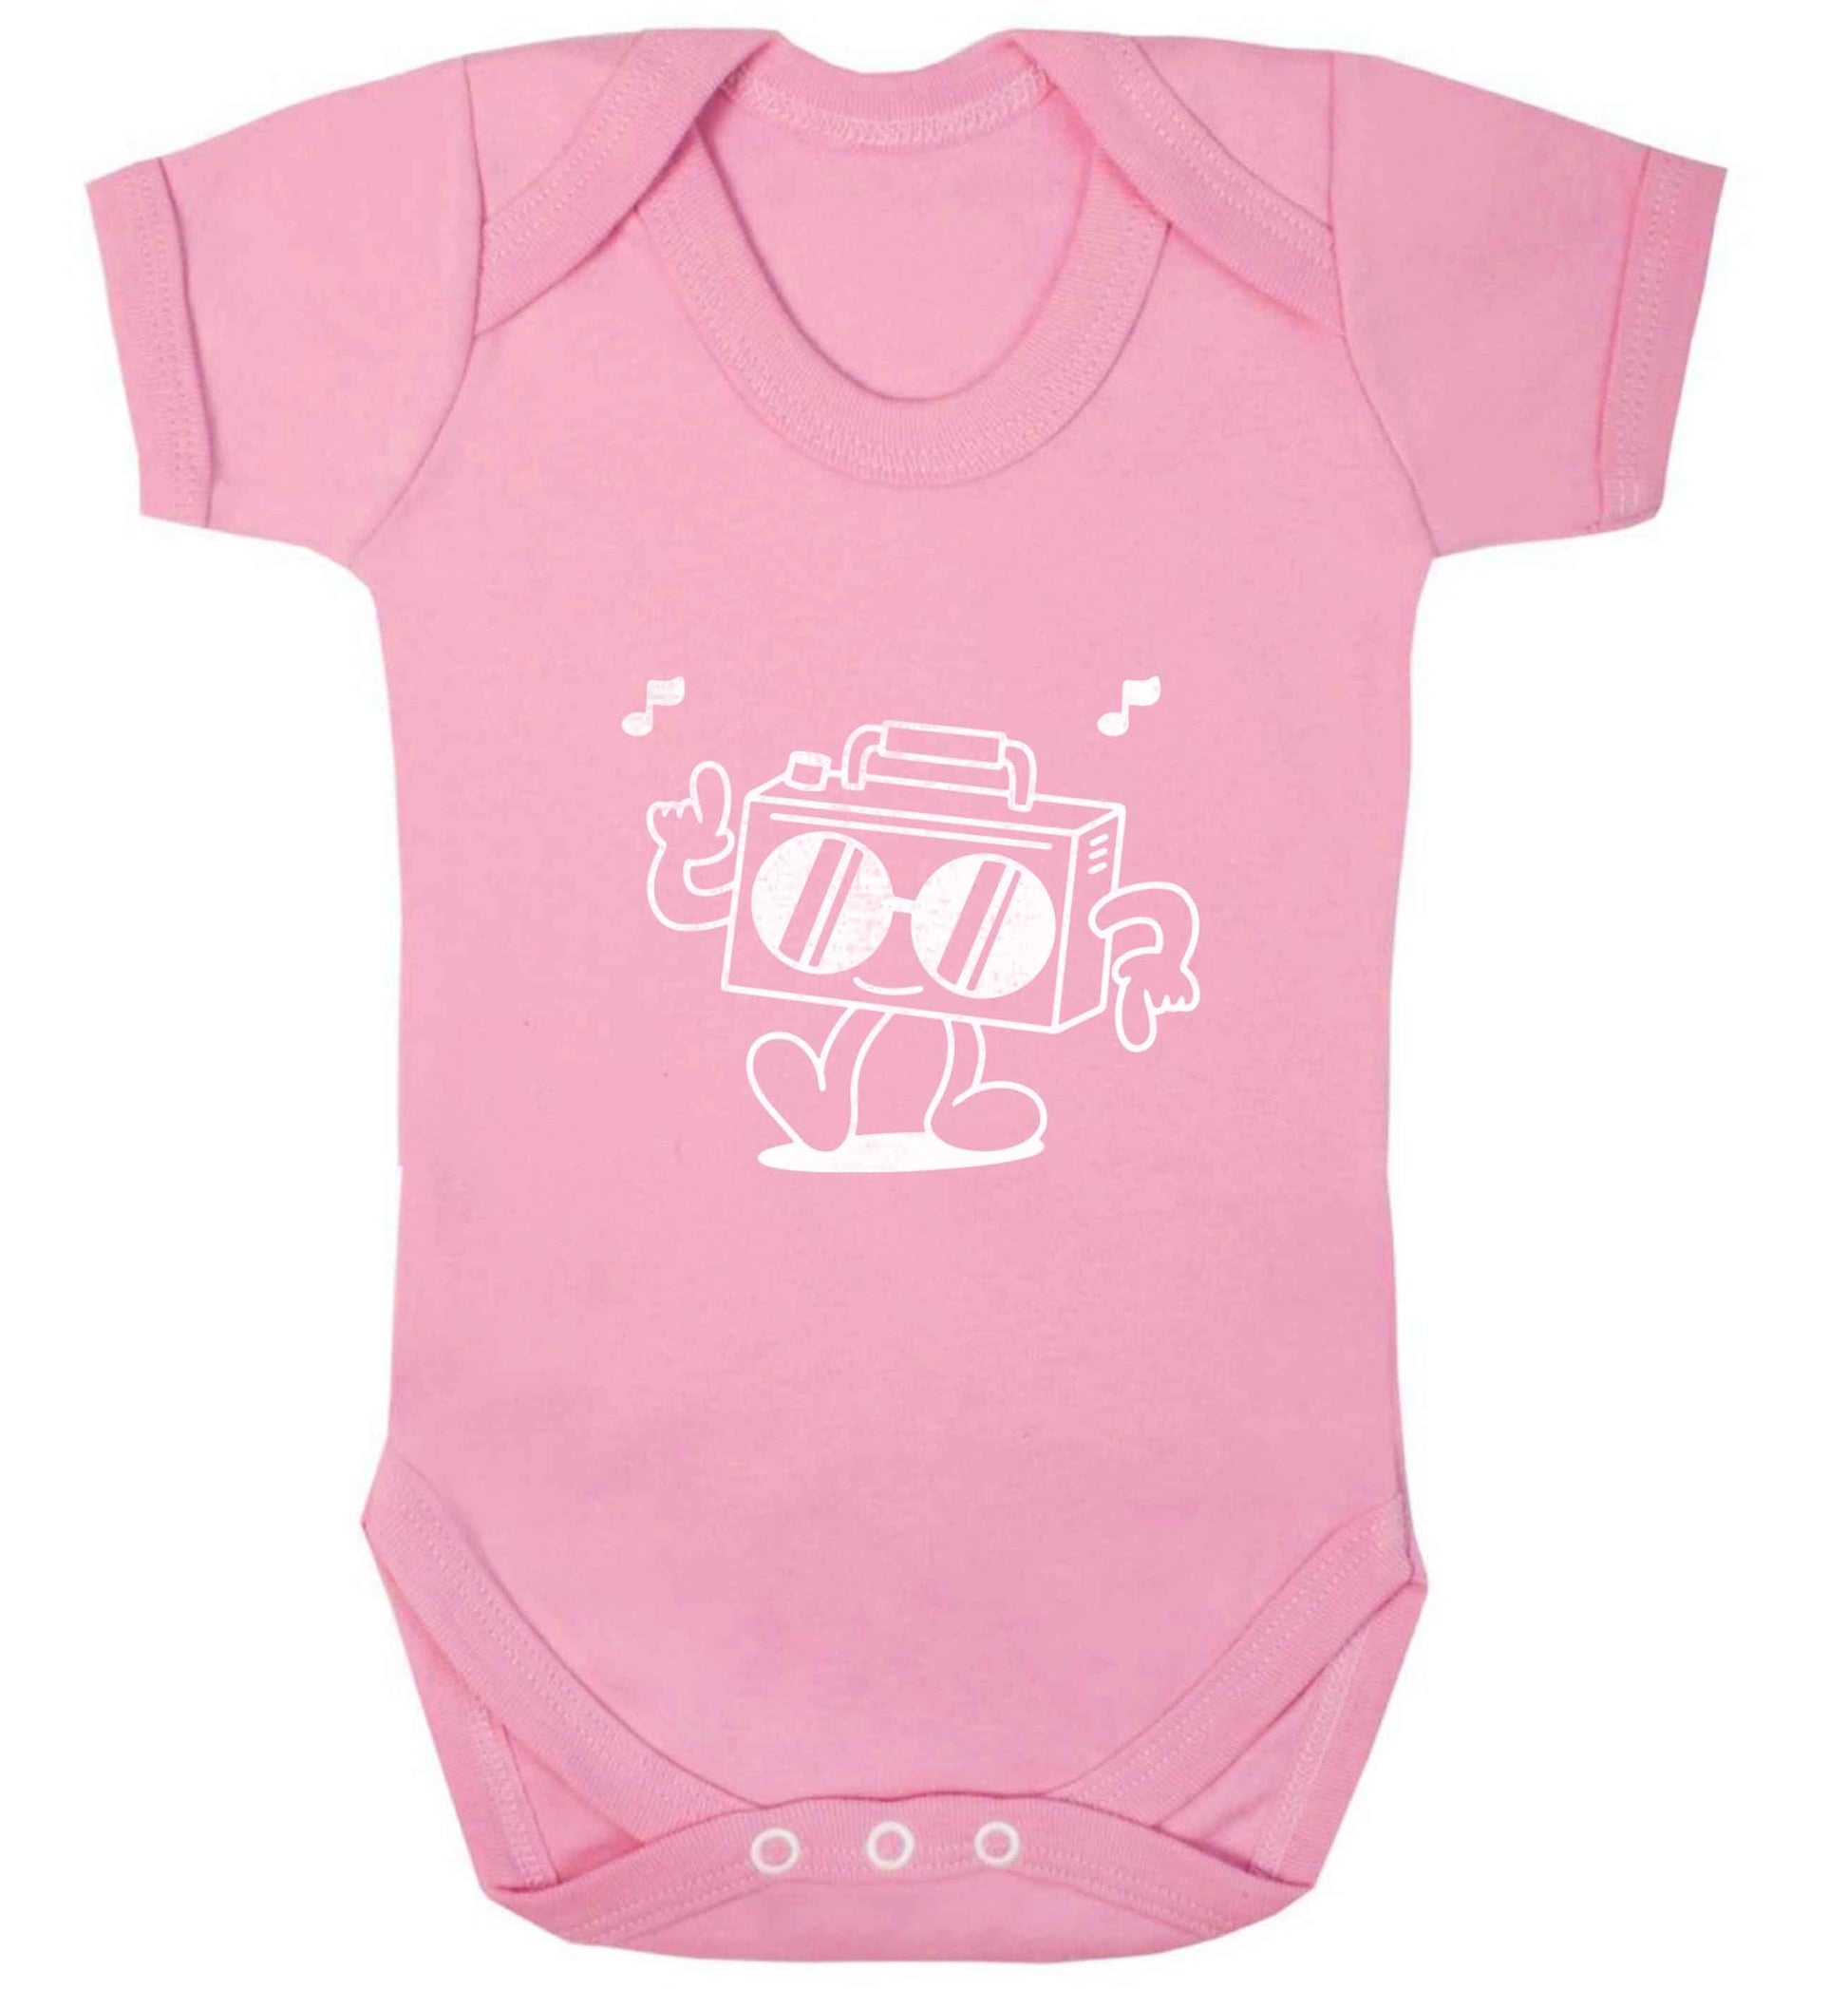 Boombox baby vest pale pink 18-24 months